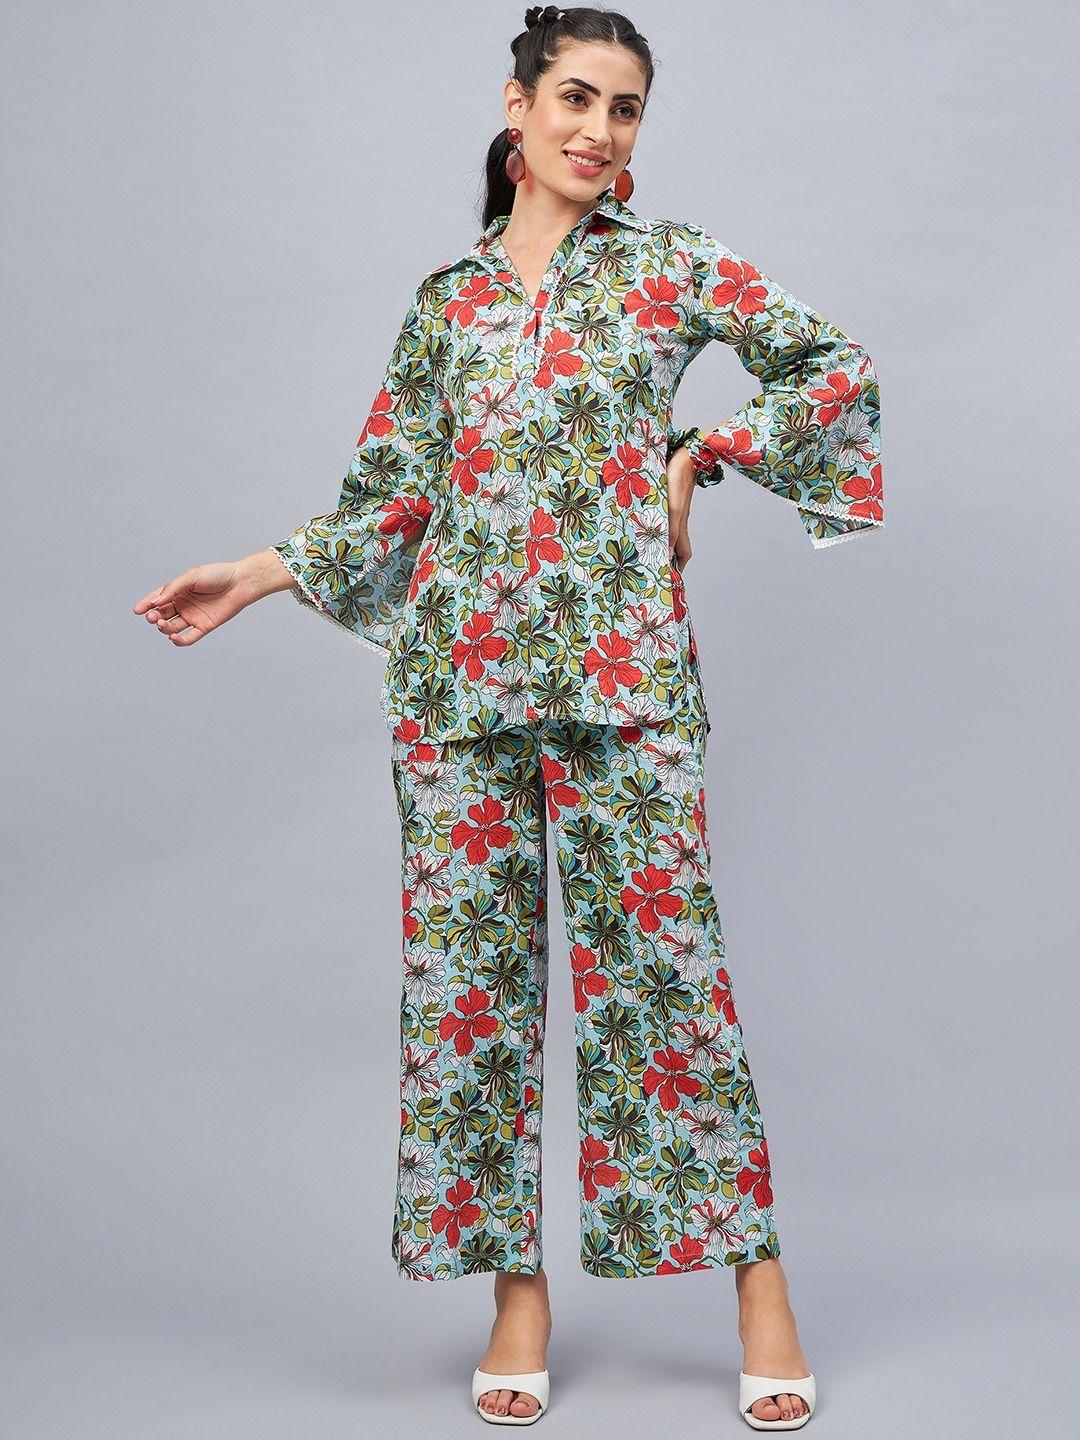 winered-floral-printed-pure-cotton-top-&-palazzos